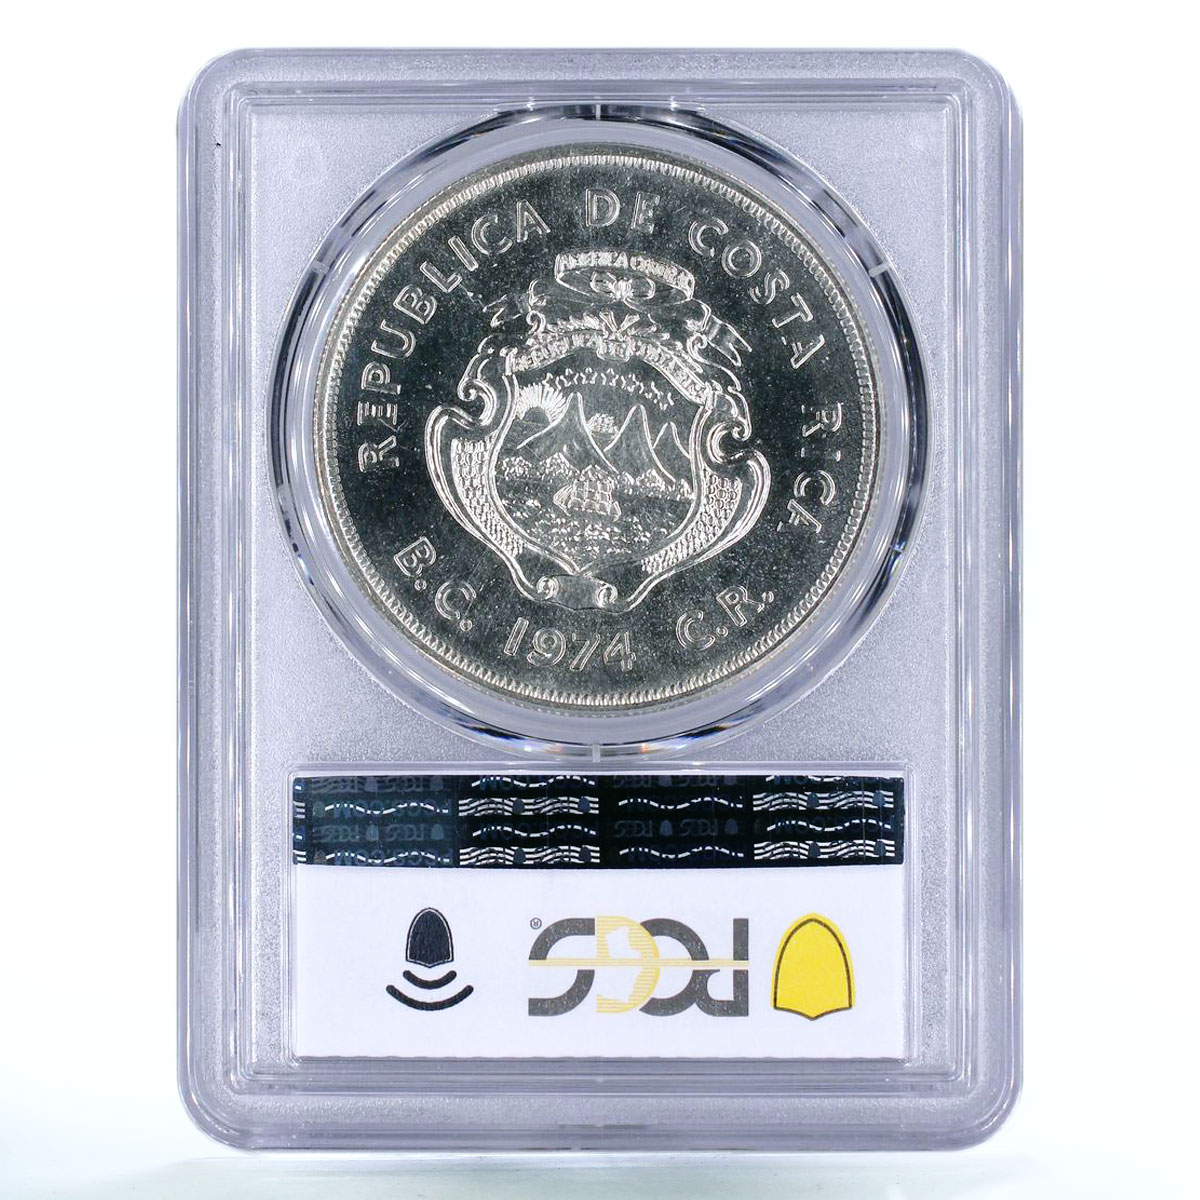 Costa Rica 100 colones Wildlife Conservation Manatee MS68 PCGS silver coin 1974